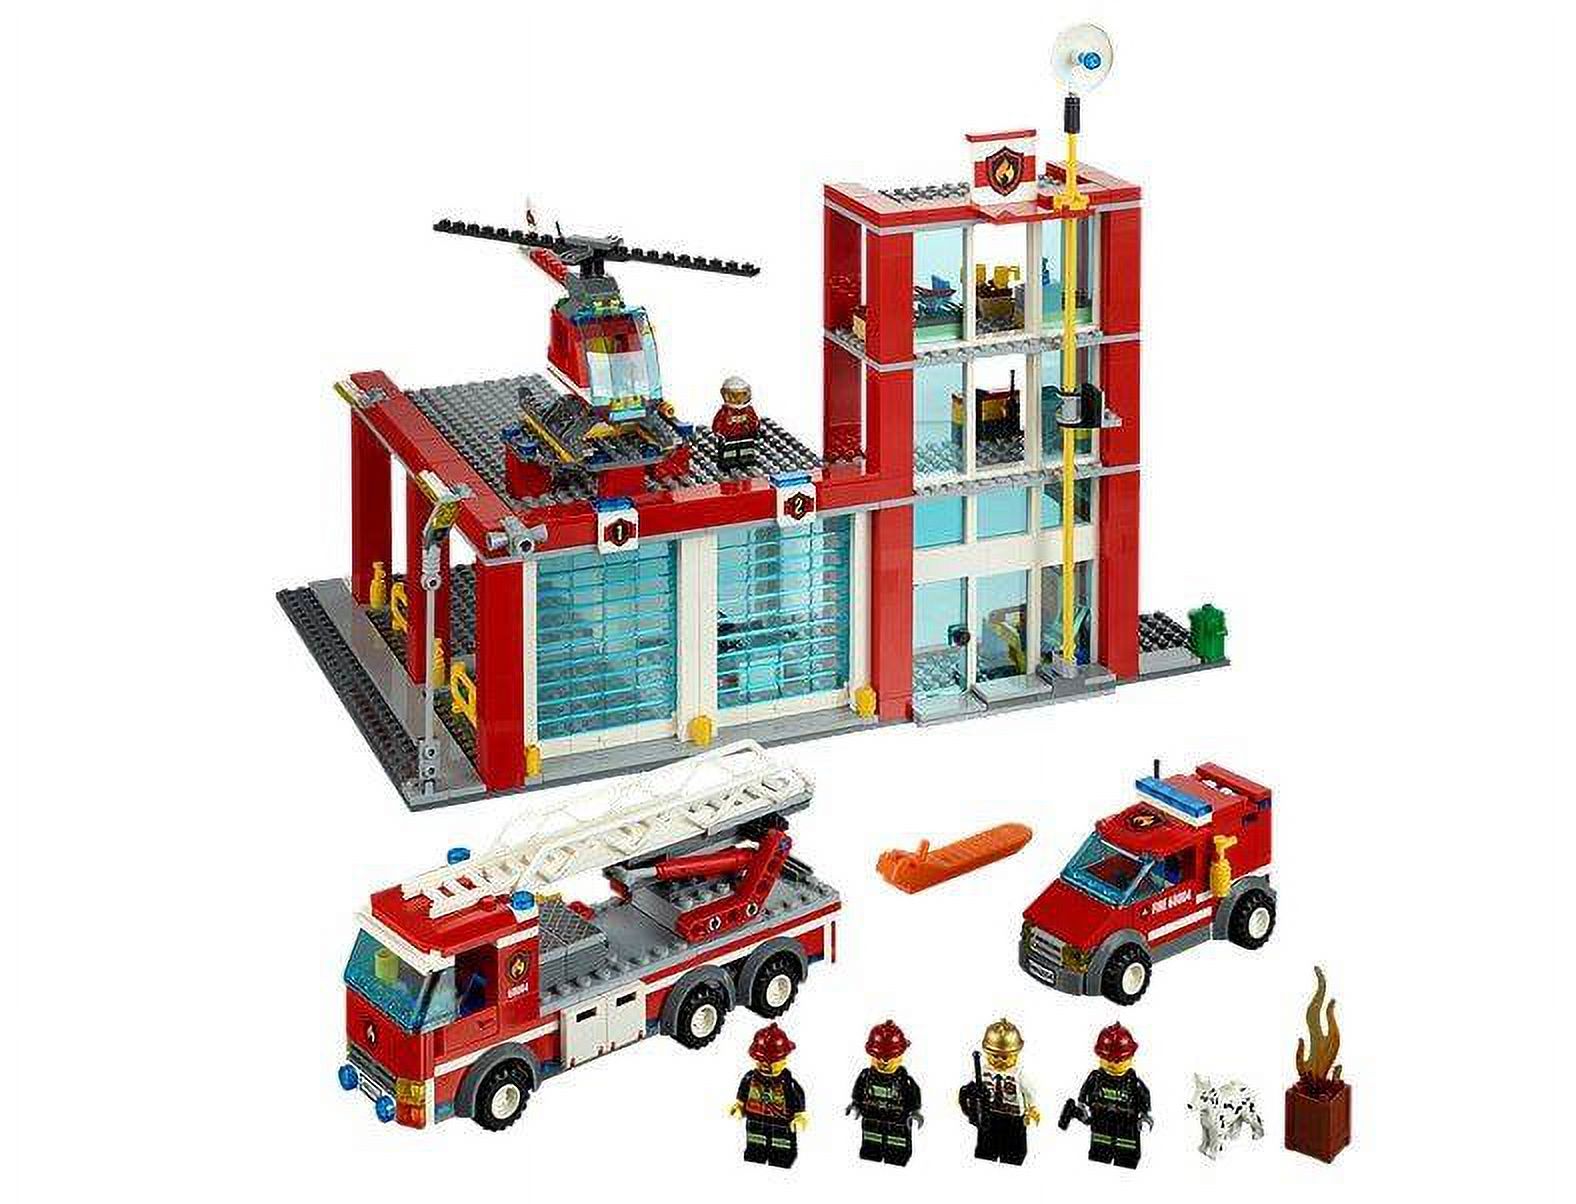 LEGO City Fire Station 60004 - image 1 of 8